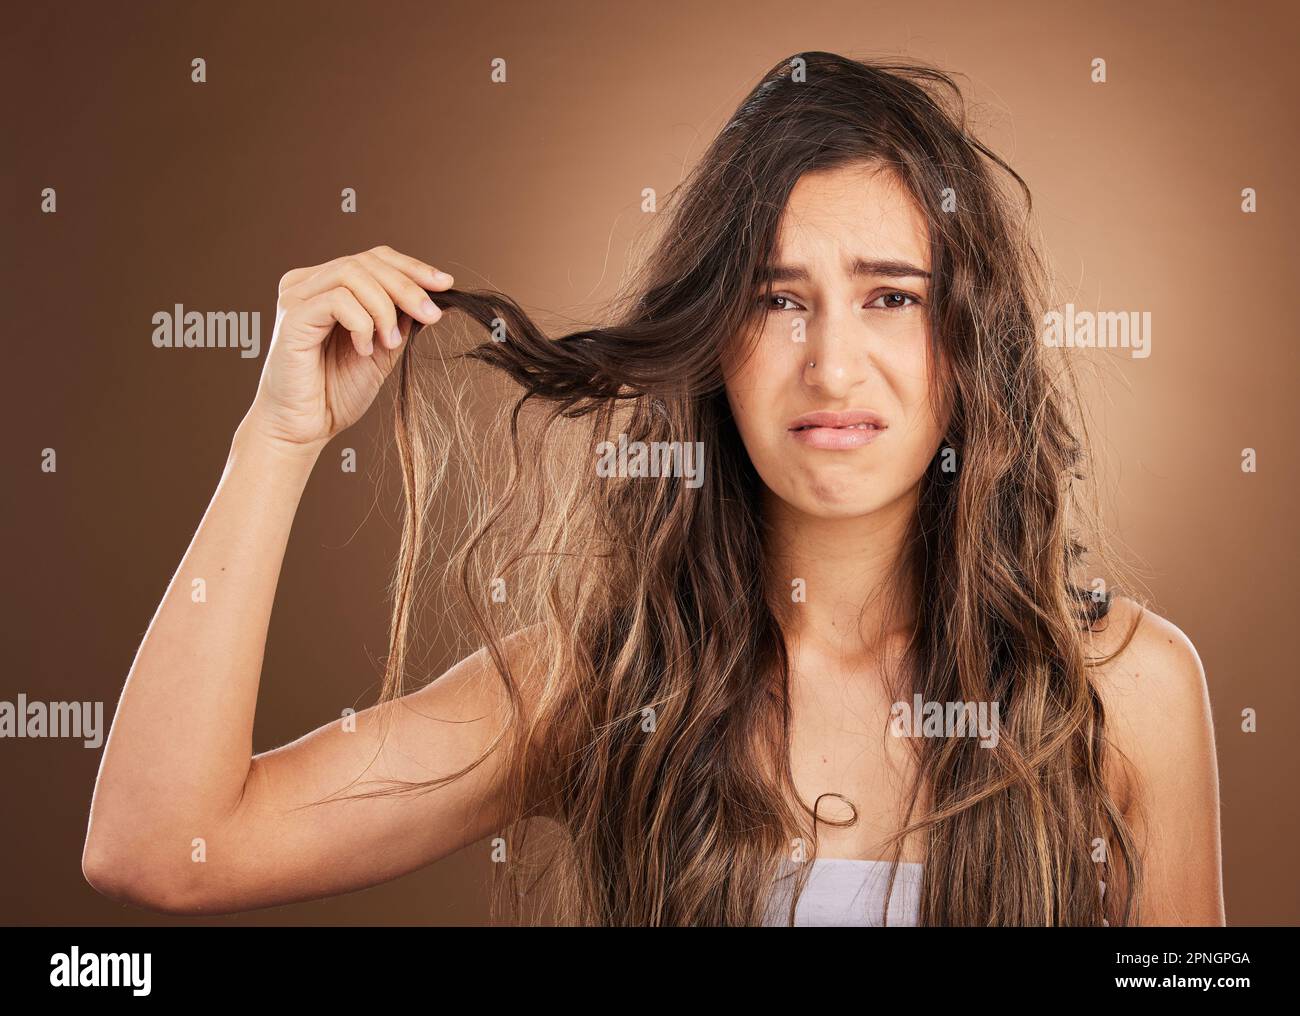 Hair loss, problem and portrait woman in studio for beauty, messy and damage against brown background. Haircare, fail and face of sad girl frustrated Stock Photo